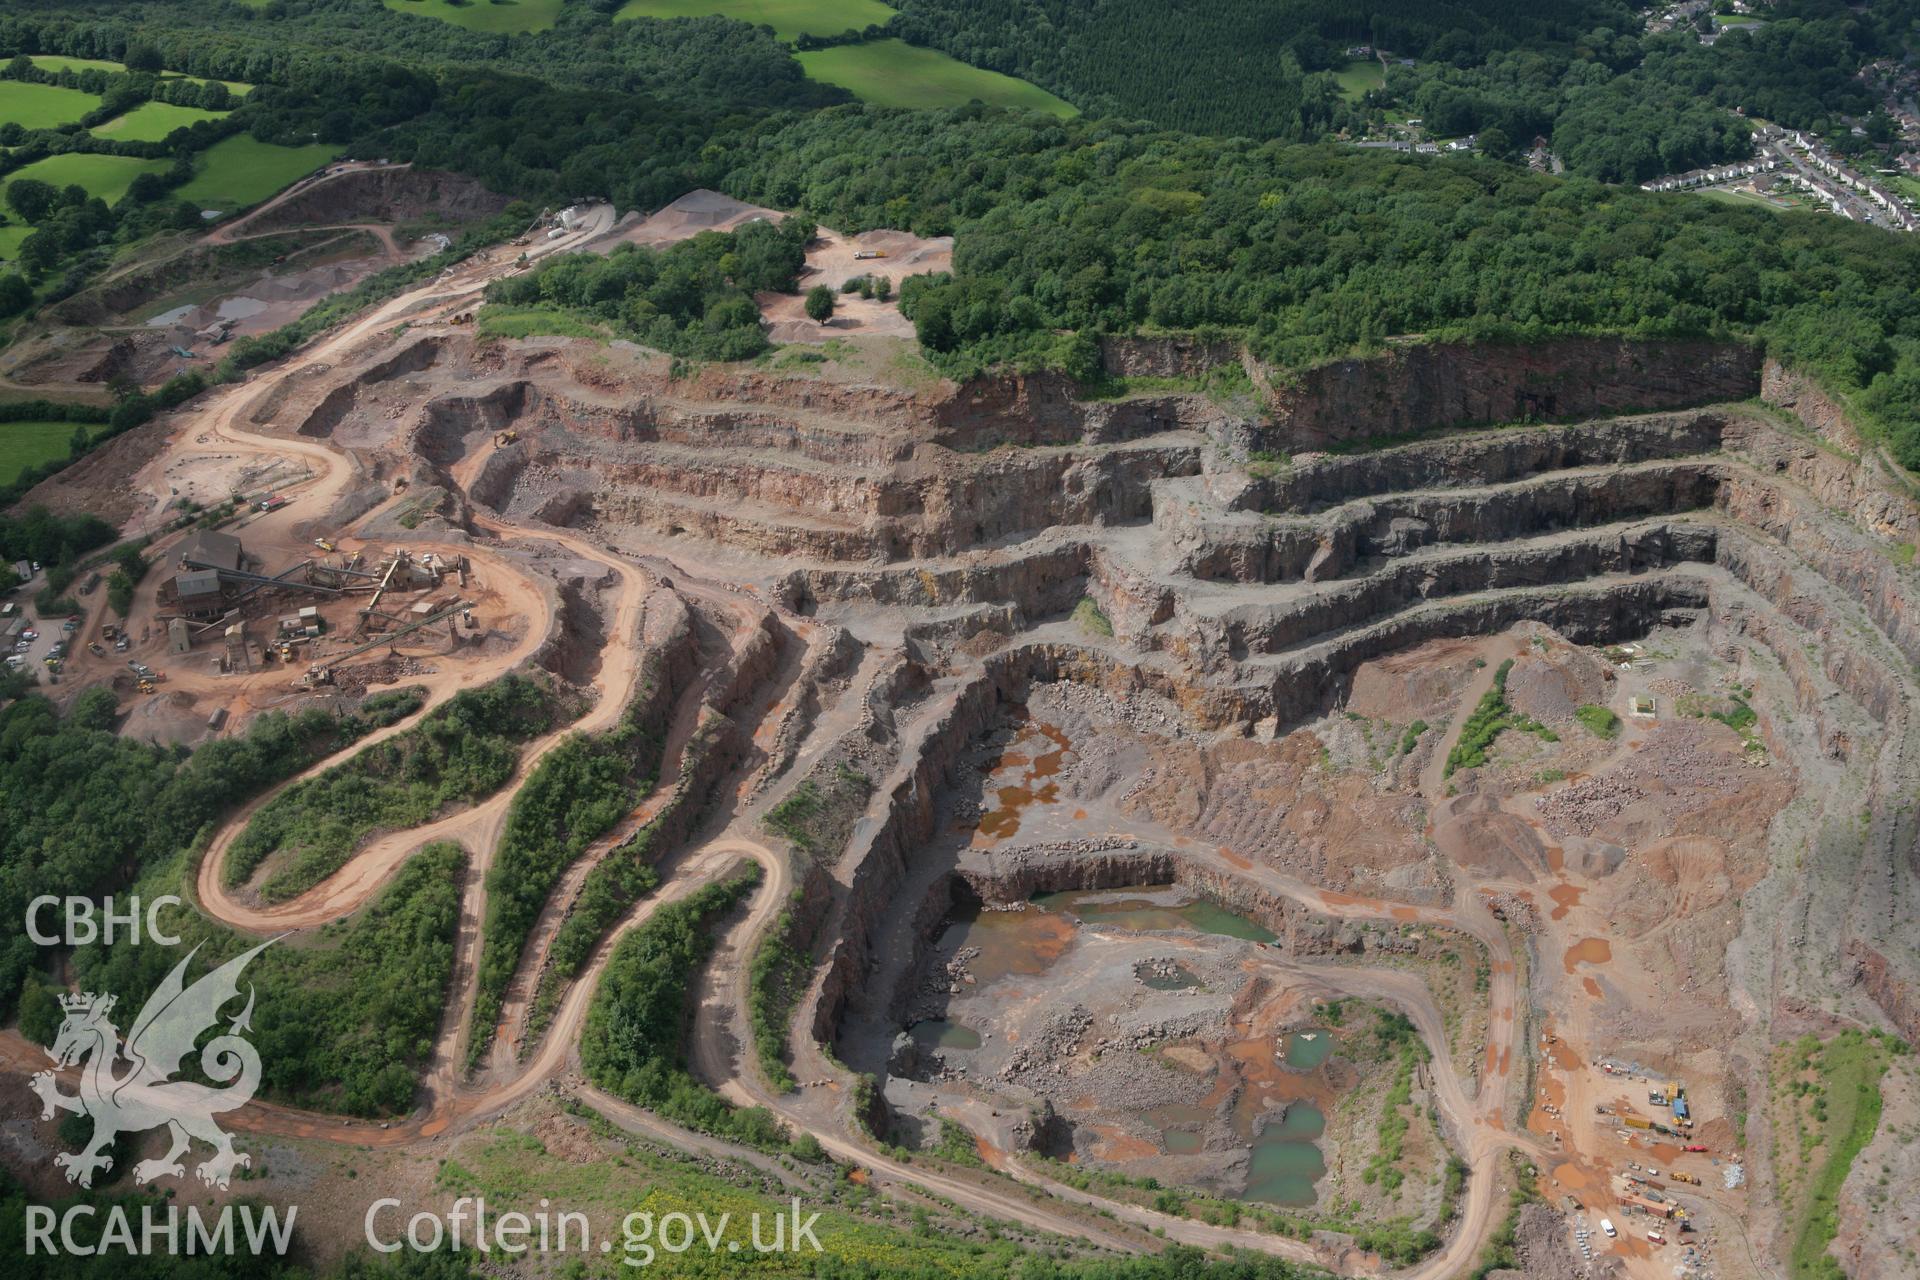 RCAHMW colour oblique aerial photograph of Taff's Well Quarry, Pentyrch. Taken on 30 July 2007 by Toby Driver